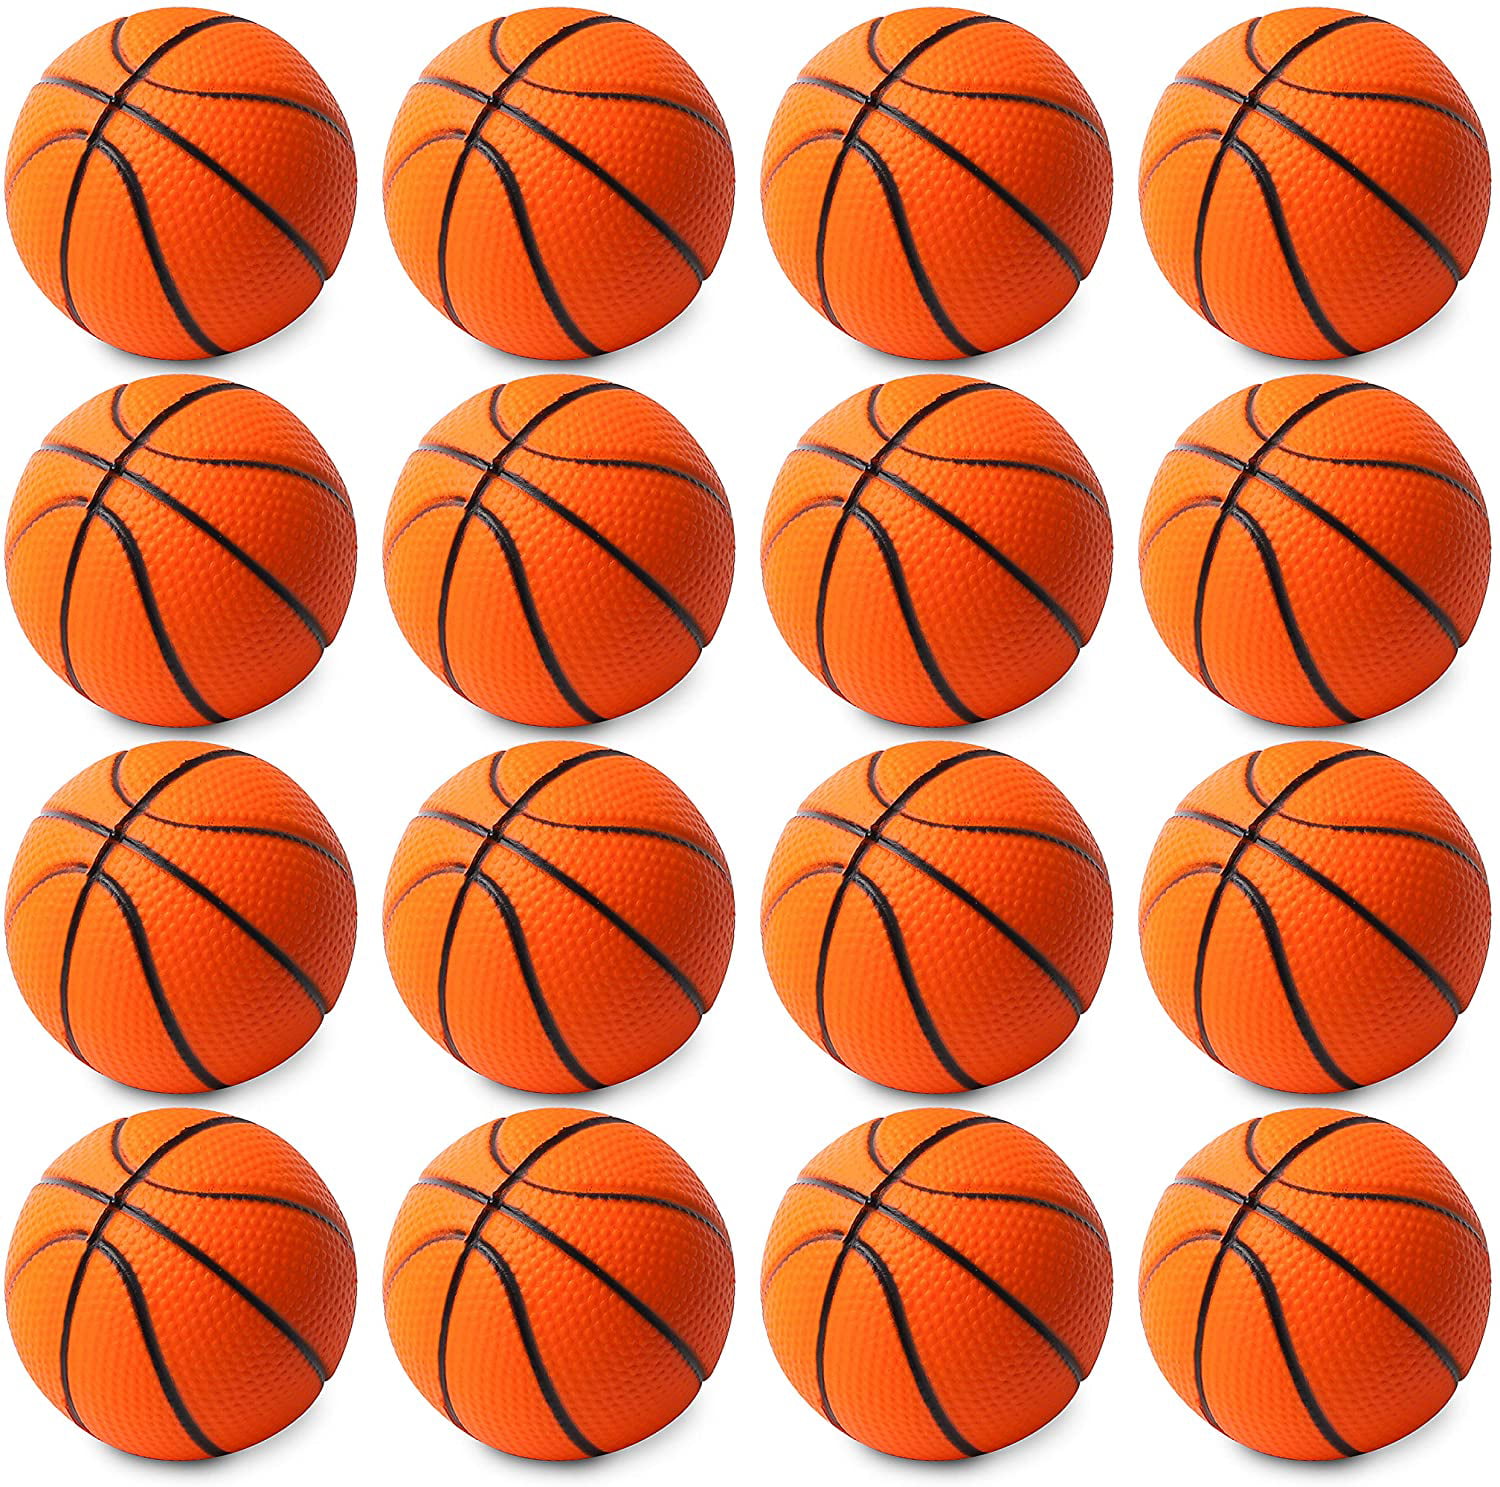 Pack of 5 Mini Basketball Styled Stress Relief Balls 